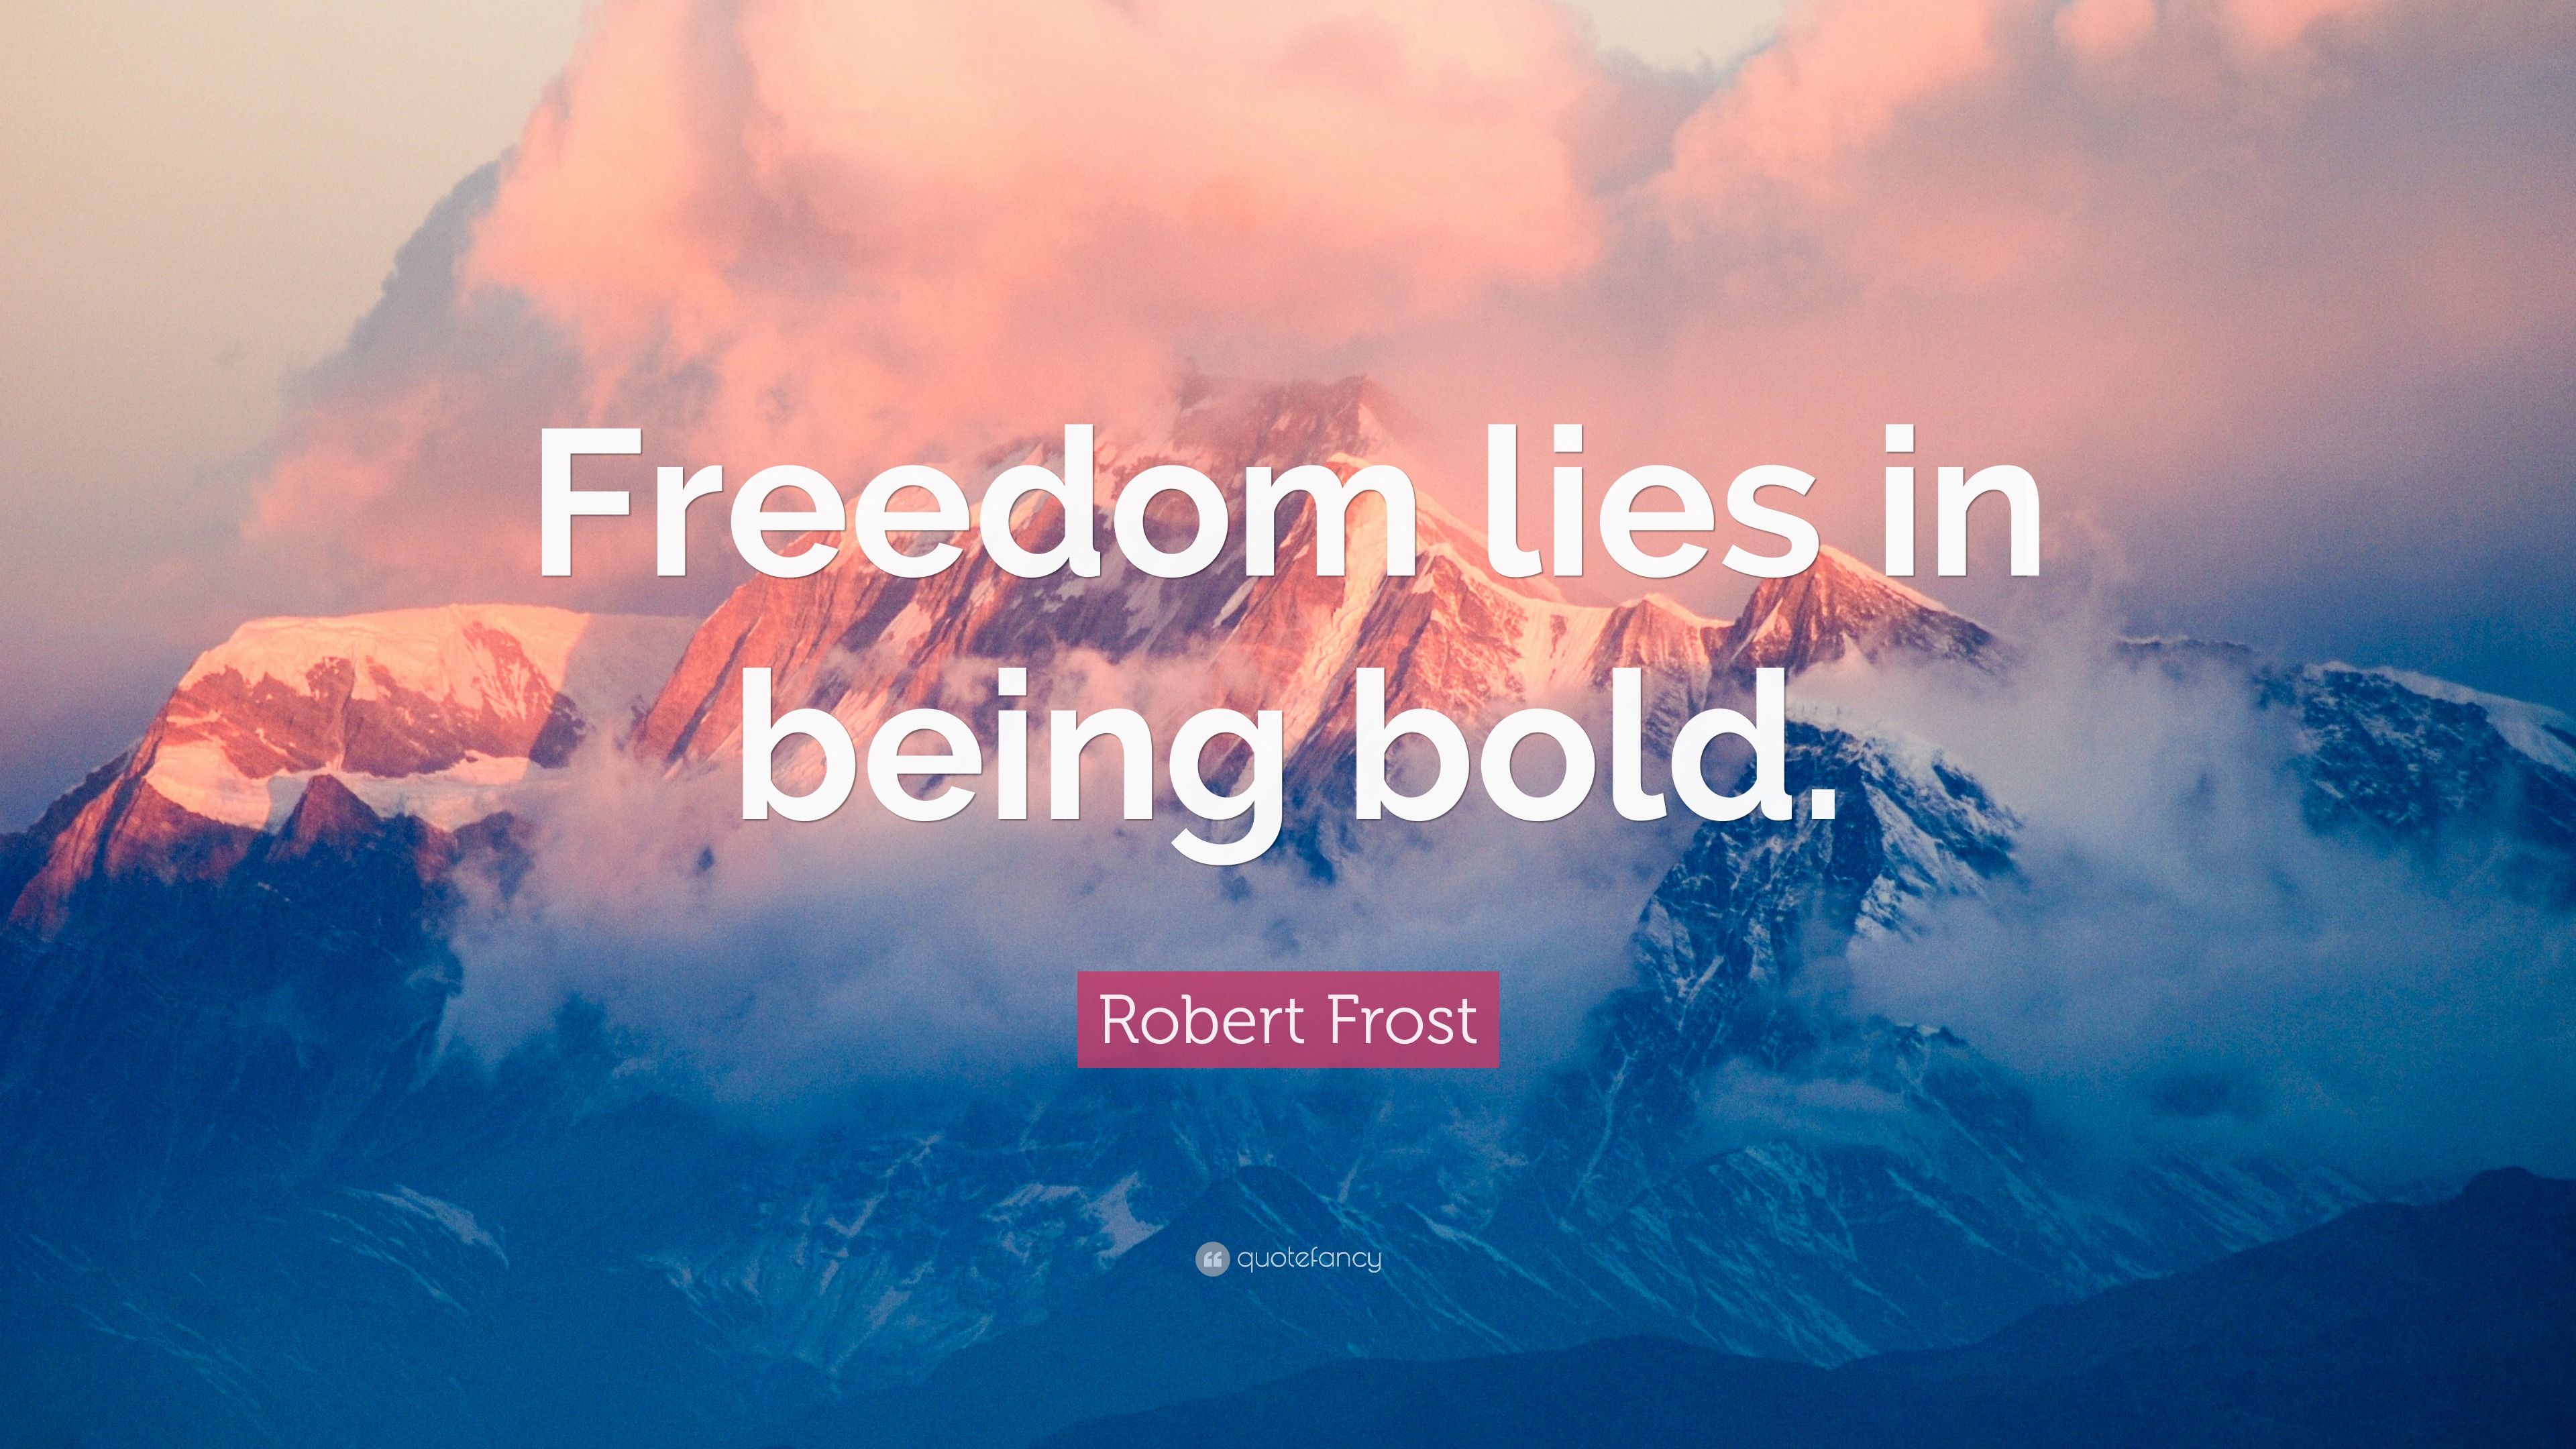 Robert Frost Quote: “Freedom lies in being bold.”